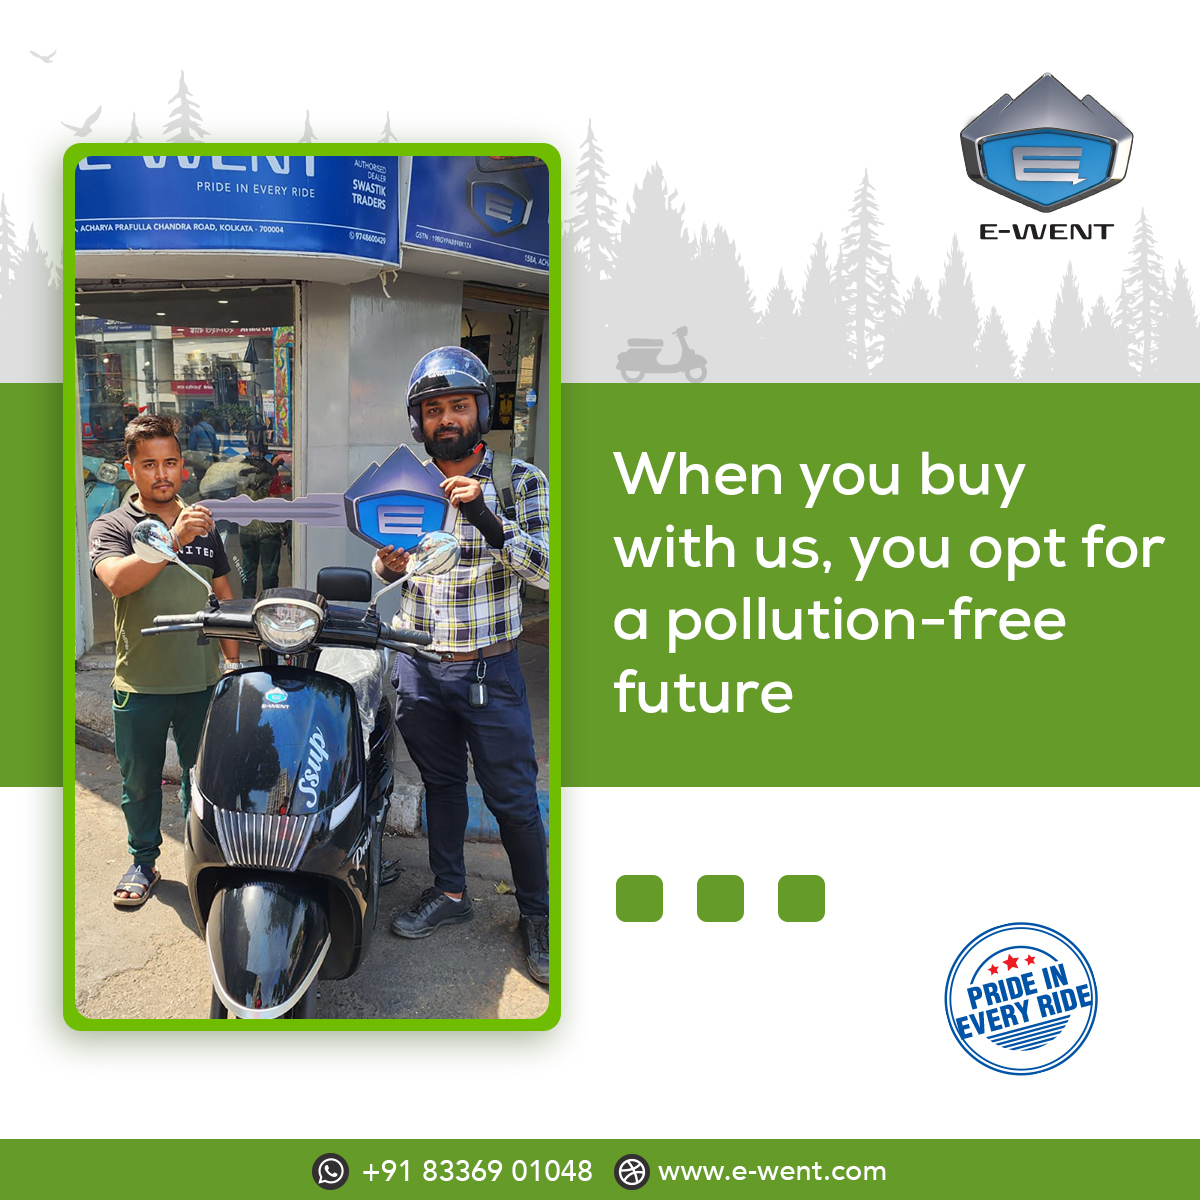 Our happy customers with E-Went Scooter for their environment friendly ride. 
.
.
.
#RideWithPride #ewent #pollutionfree #SustainableTransportation #RideWithPower #electricvehicle #ewent #cleanindia #enviornment #rideiwthelectric #ElectricAdventures #electrifyyourride